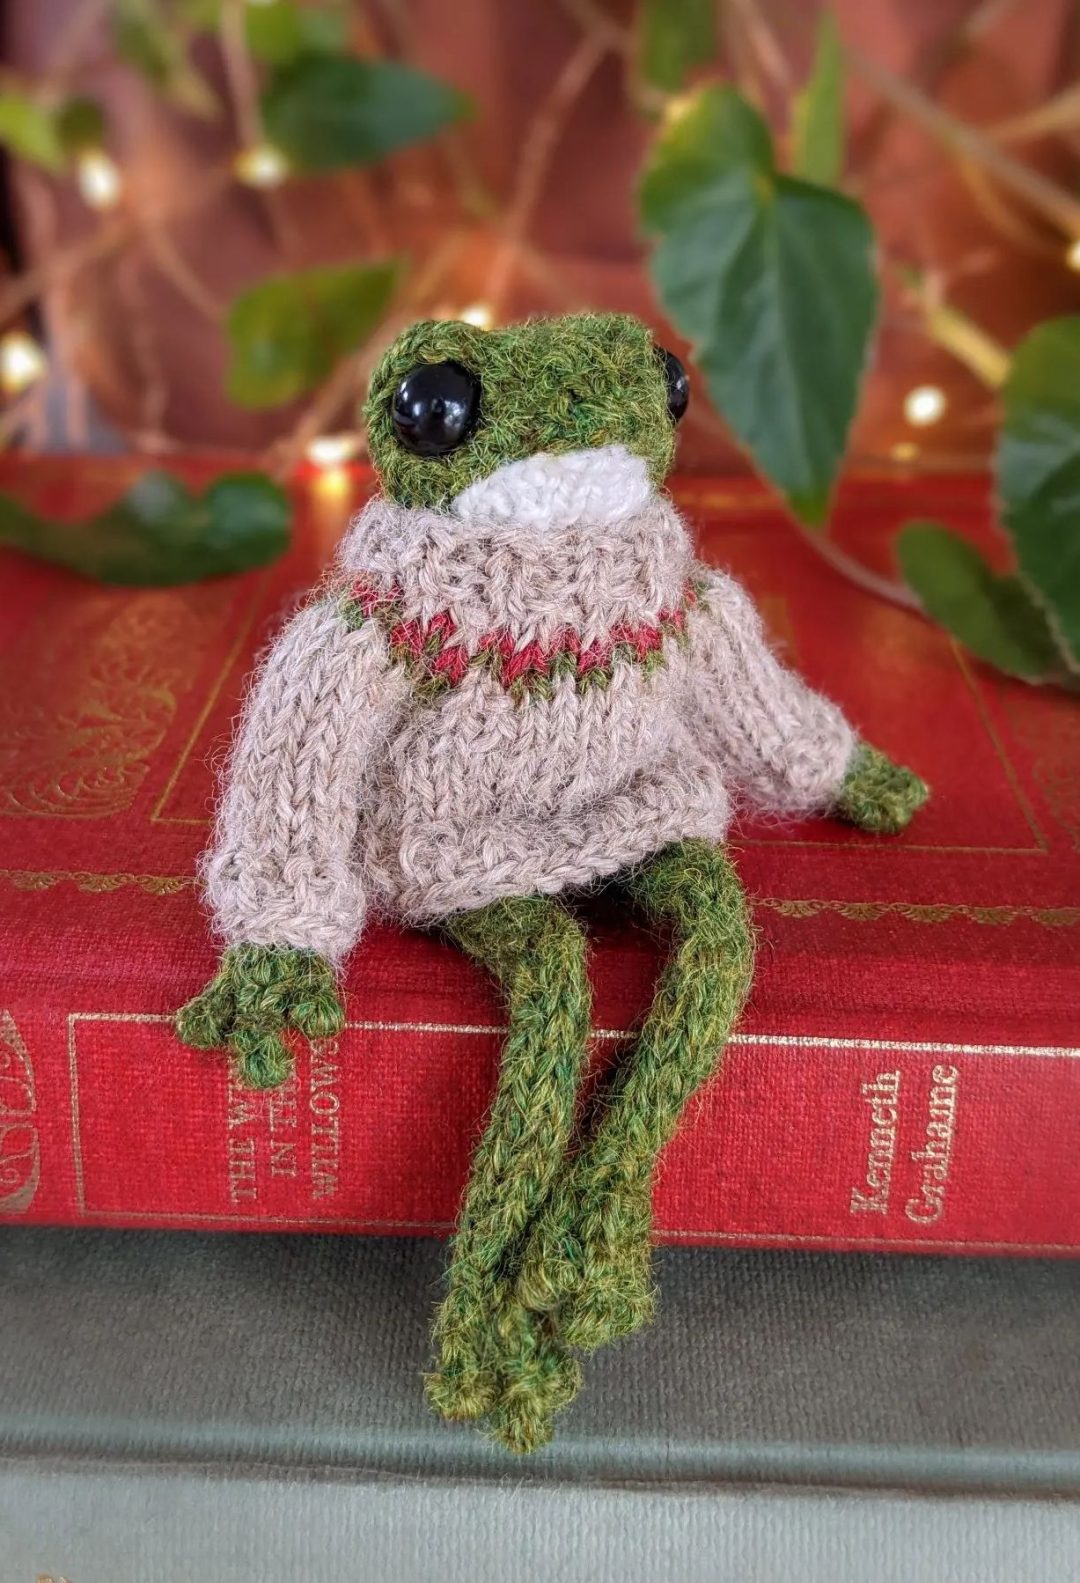 Frog knitting pattern & stripy sweater From Britain with Love